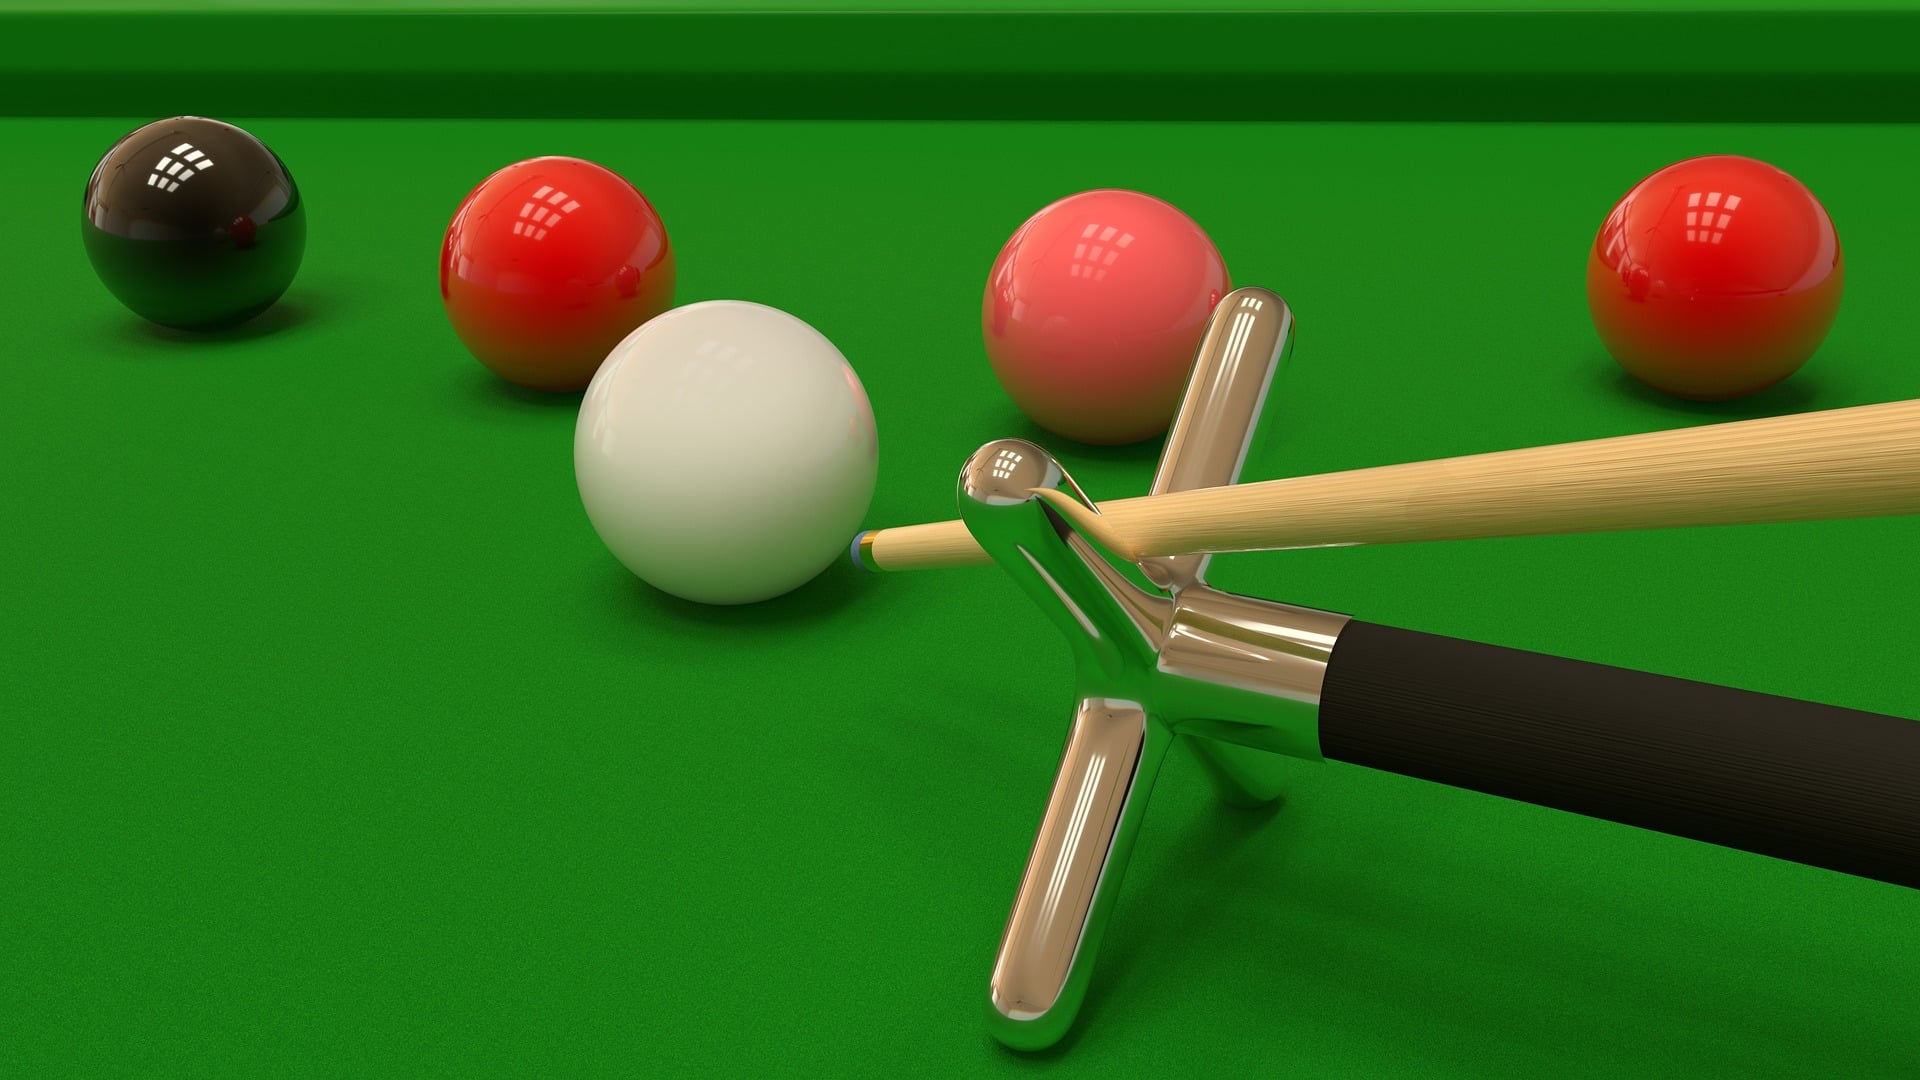 A Snooker Table with Balls